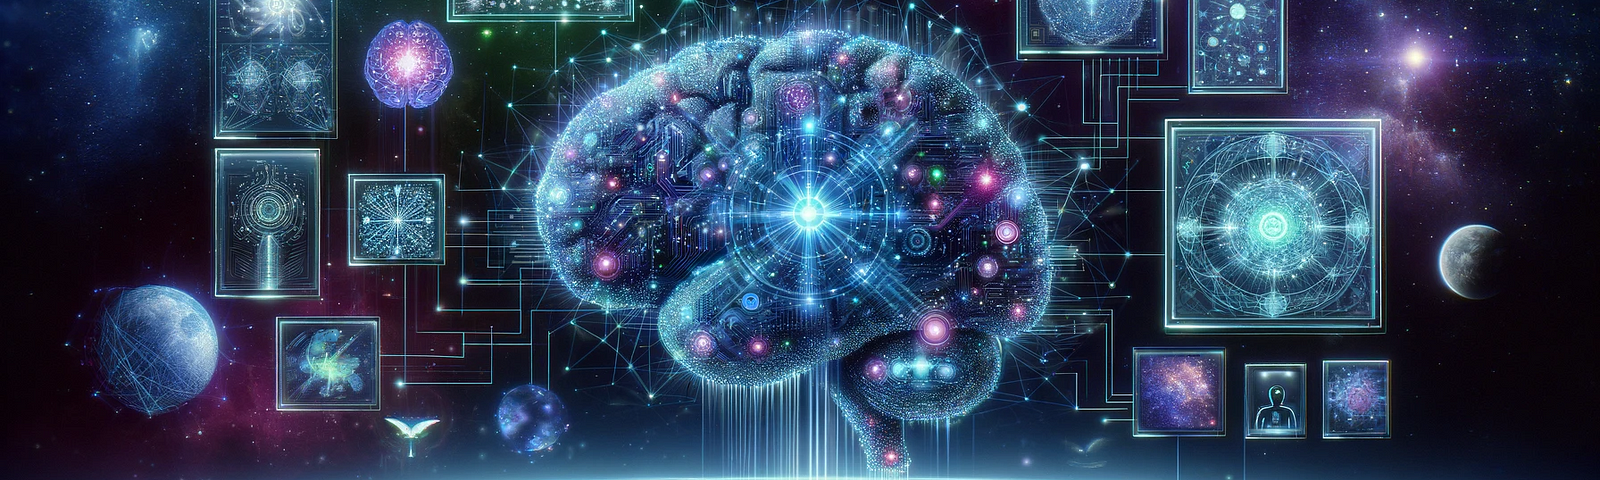 Digital illustration of a human brain interwoven with futuristic circuitry and glowing neural networks, symbolizing the integration of artificial intelligence with human cognition.